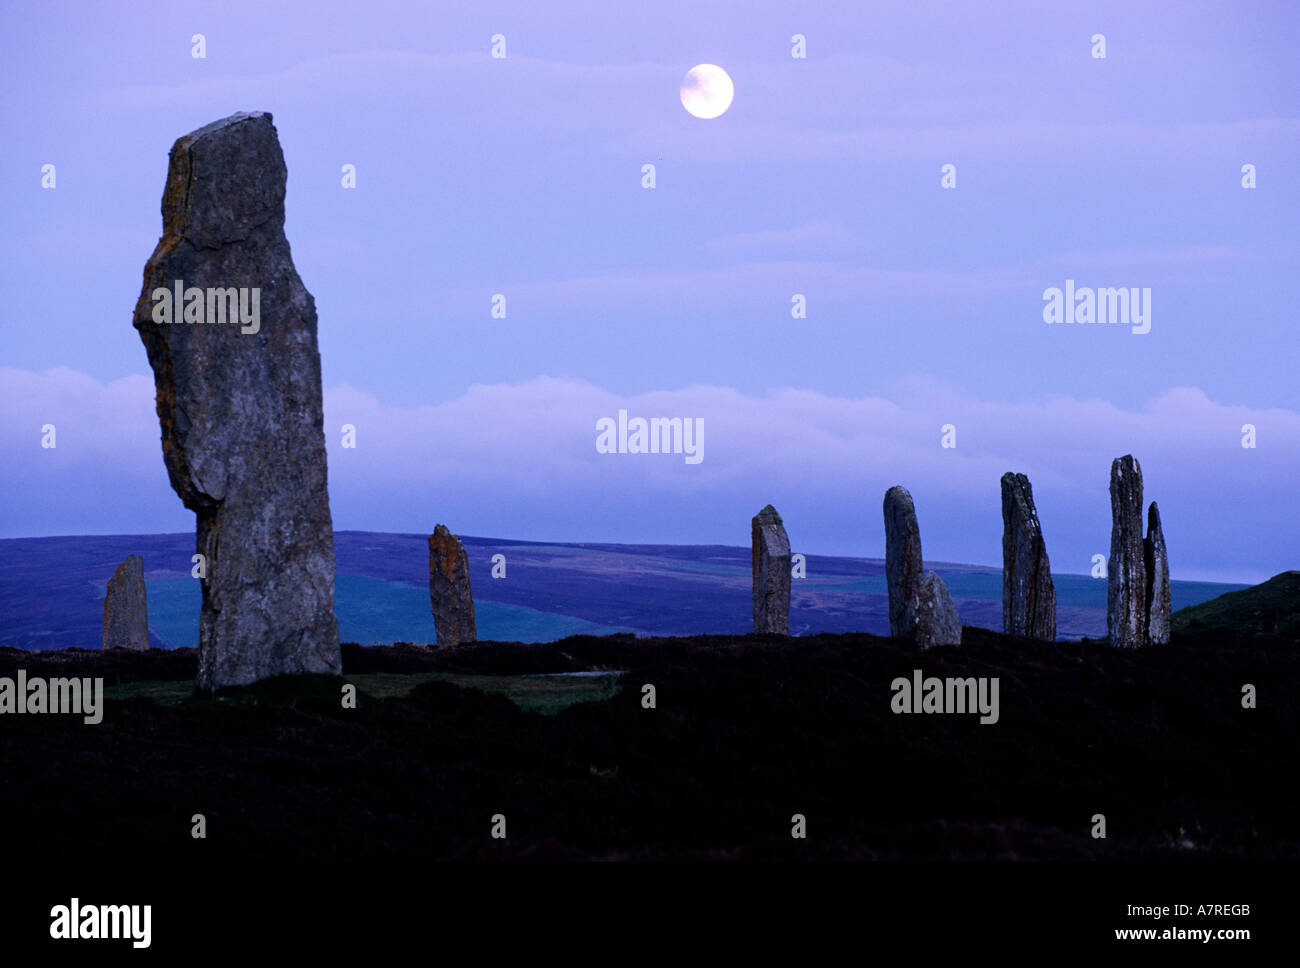 United Kingdom, Scotland, Orkney Islands, Mainland, standing stones of the Ring of Brogar close to the Loch of Stenness Stock Photo